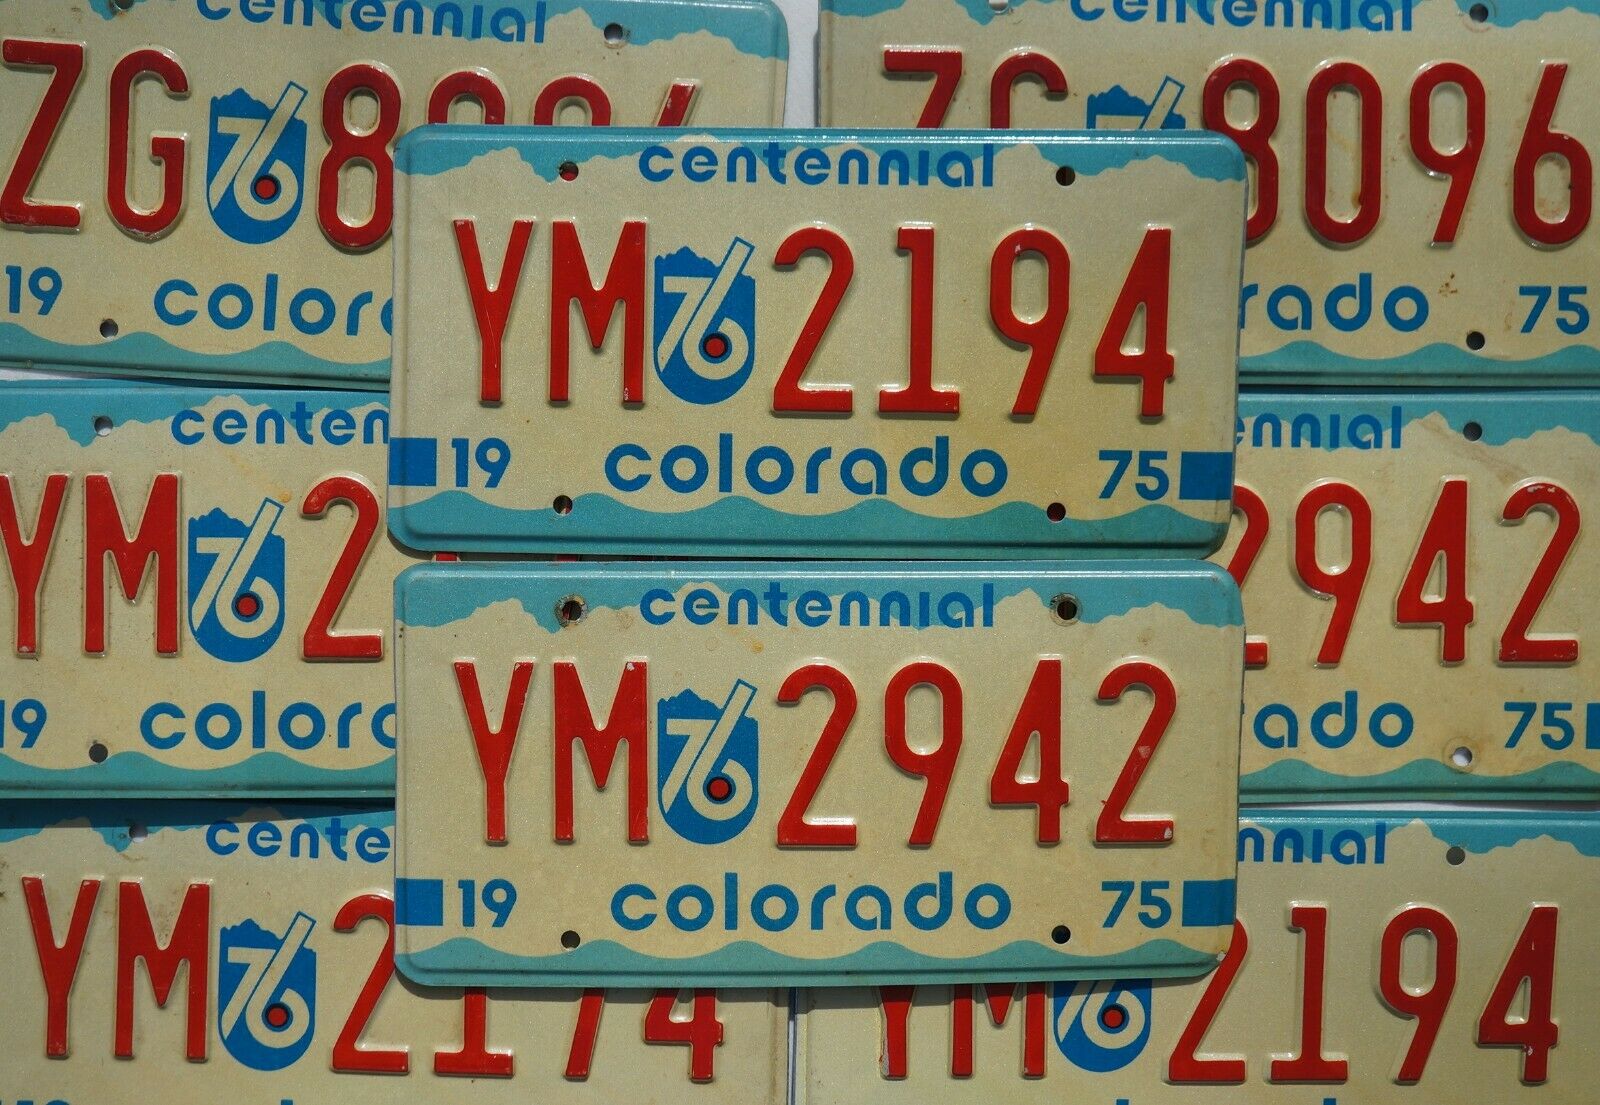 One Or More 1975 1976 Colorado Bicentennial License Plate Tags - Good Condition